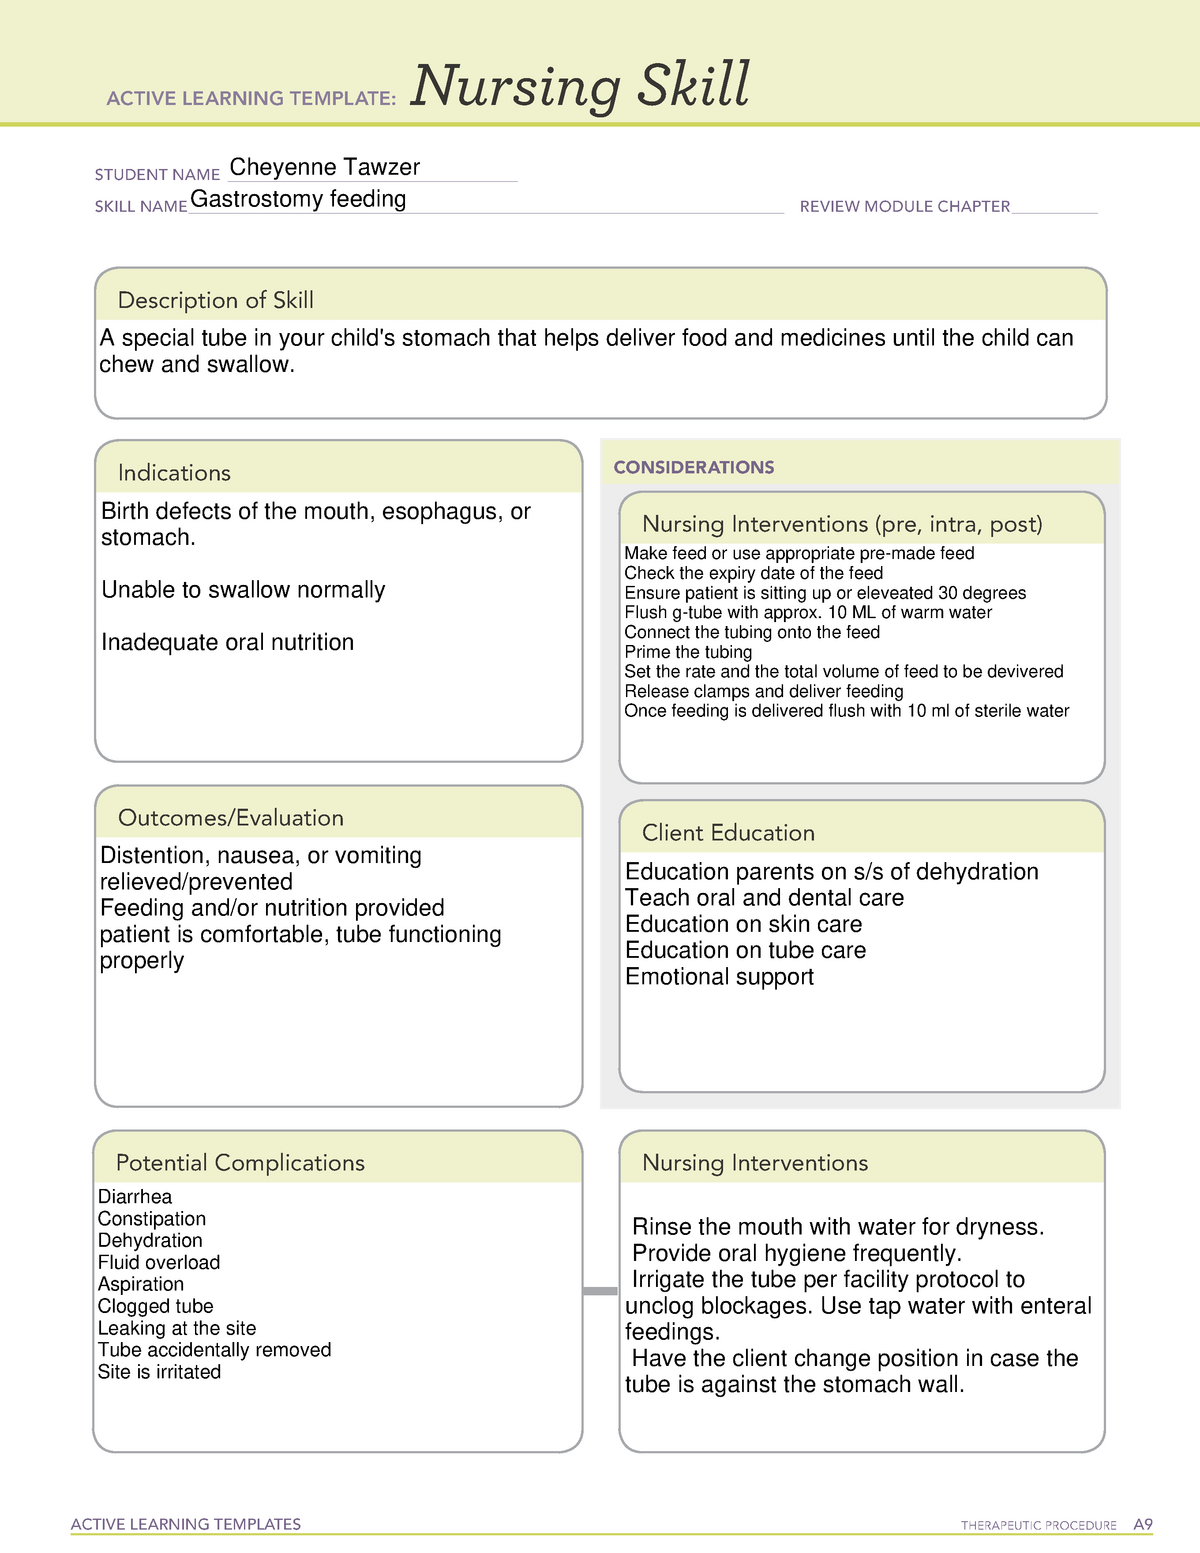 nursing-skill-form-active-learning-templates-therapeutic-procedure-a